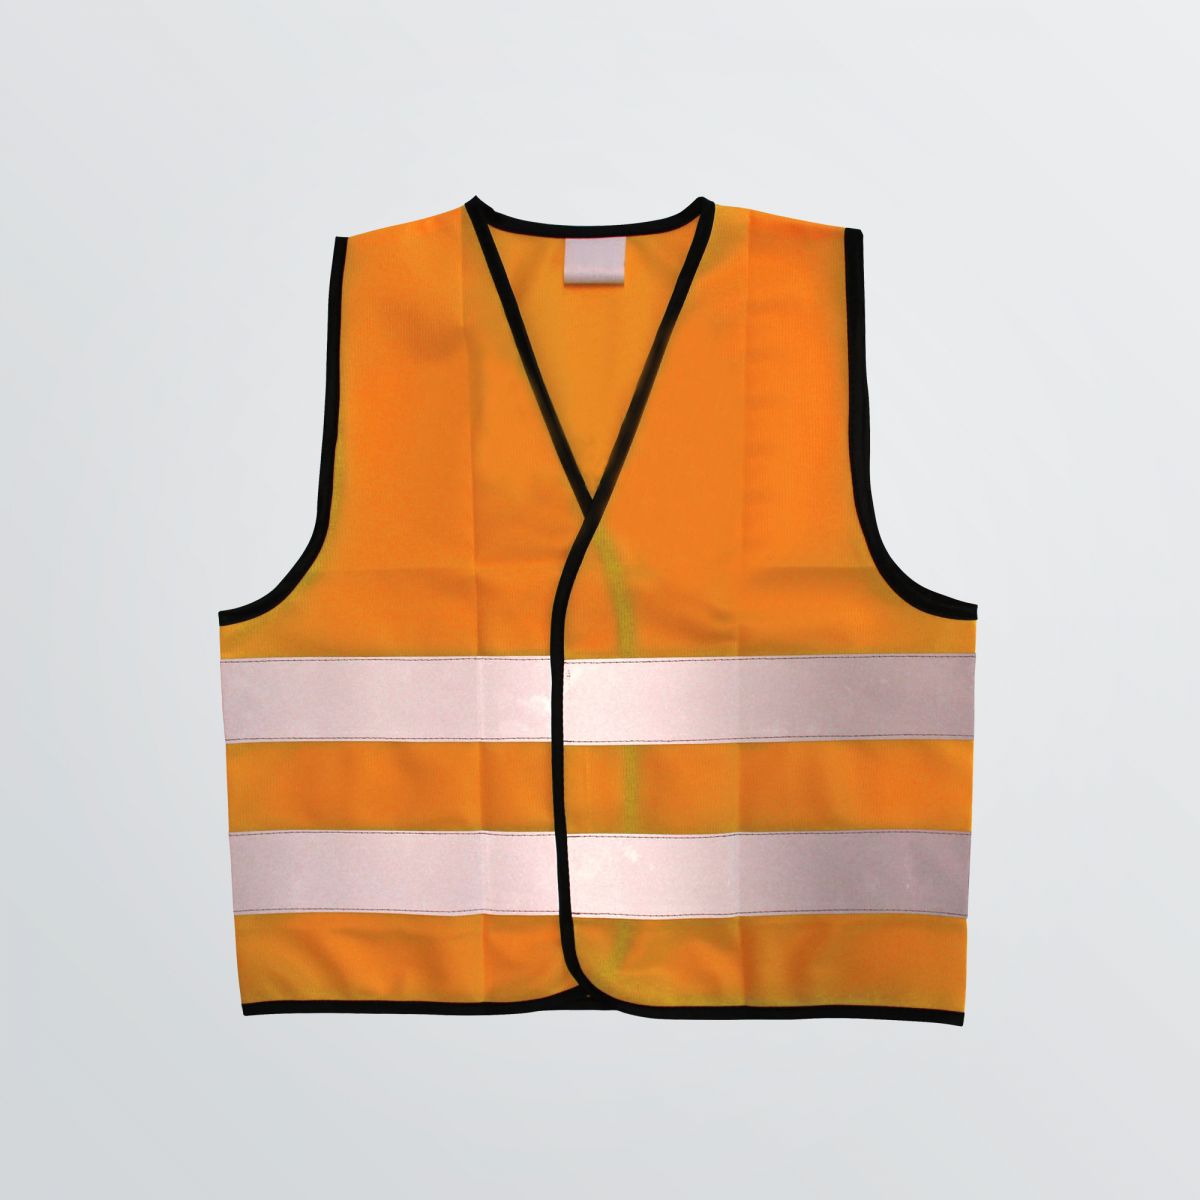 customisable Signal Vest as a classical safety vest in signal colours - depiction in orange with reflector stripes - front view